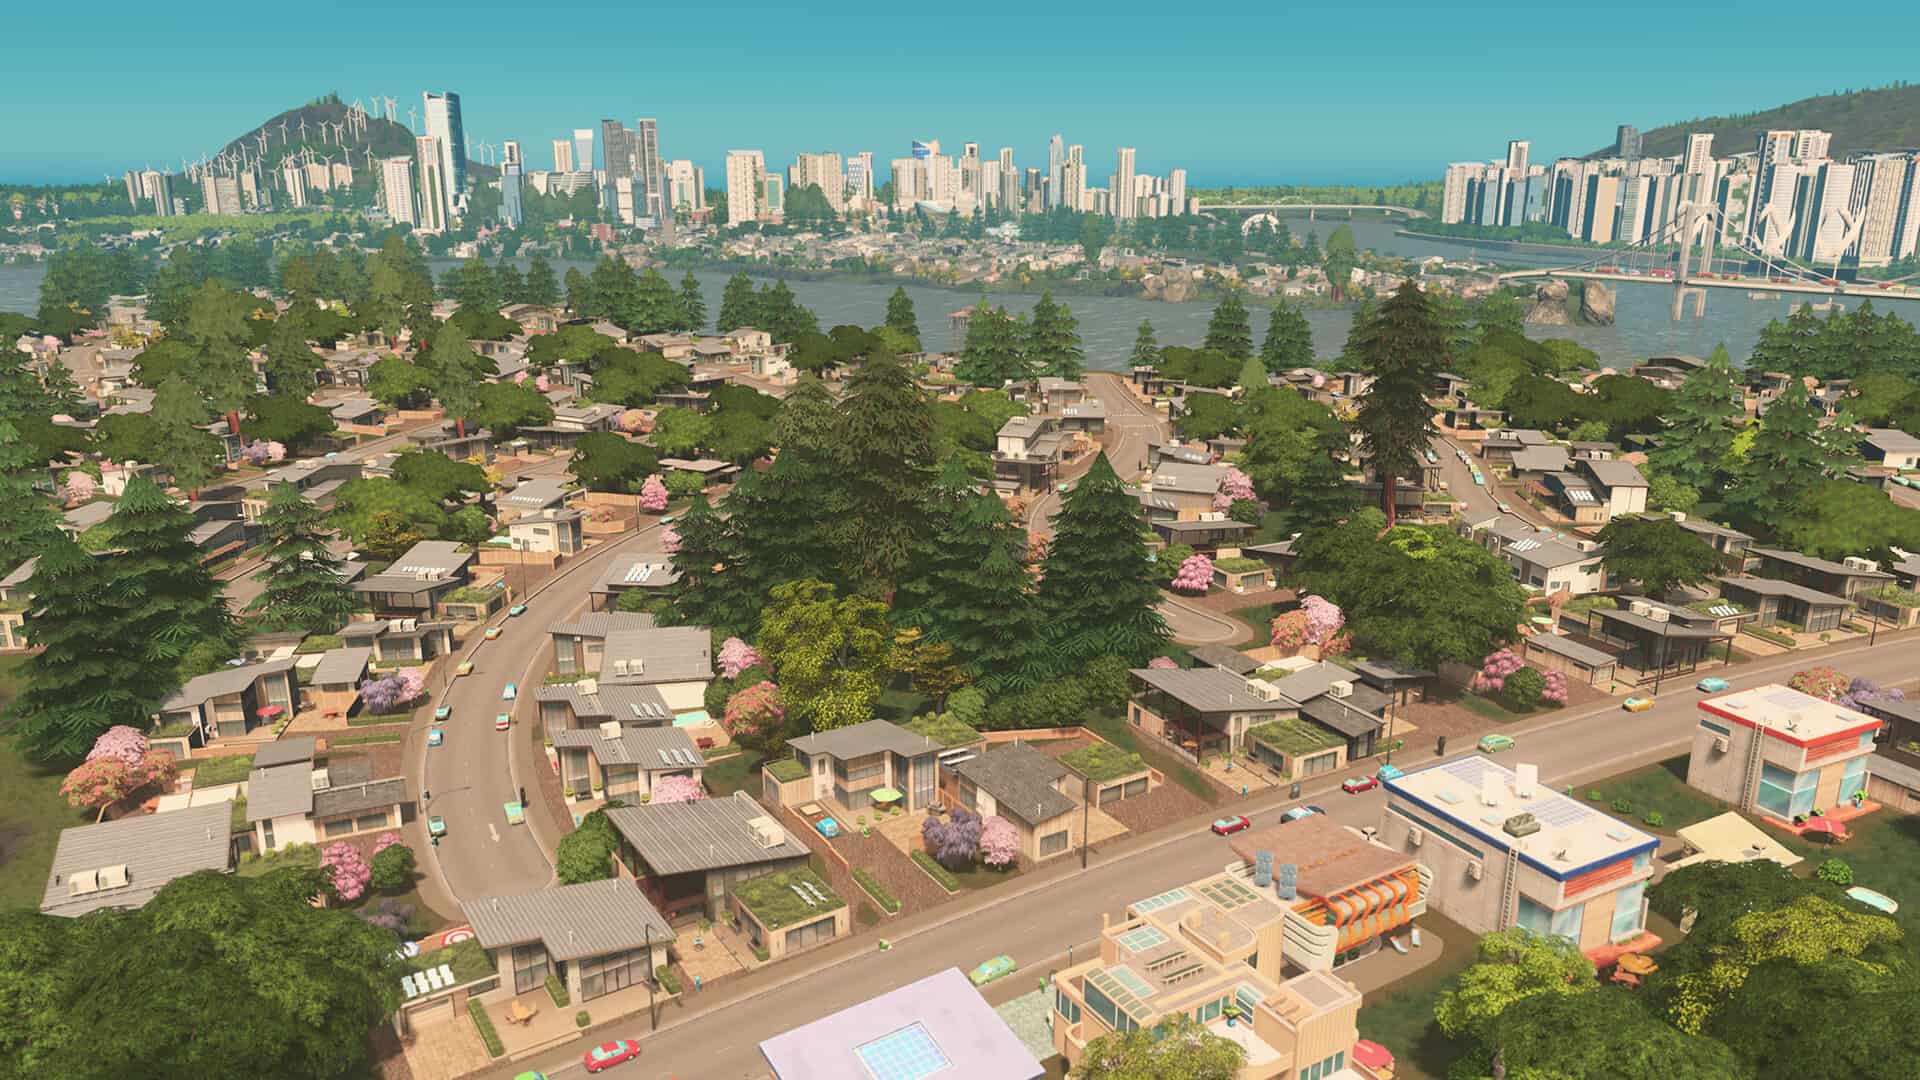 Does Cities: Skylines 2 Have Mod Support on PC and Consoles?